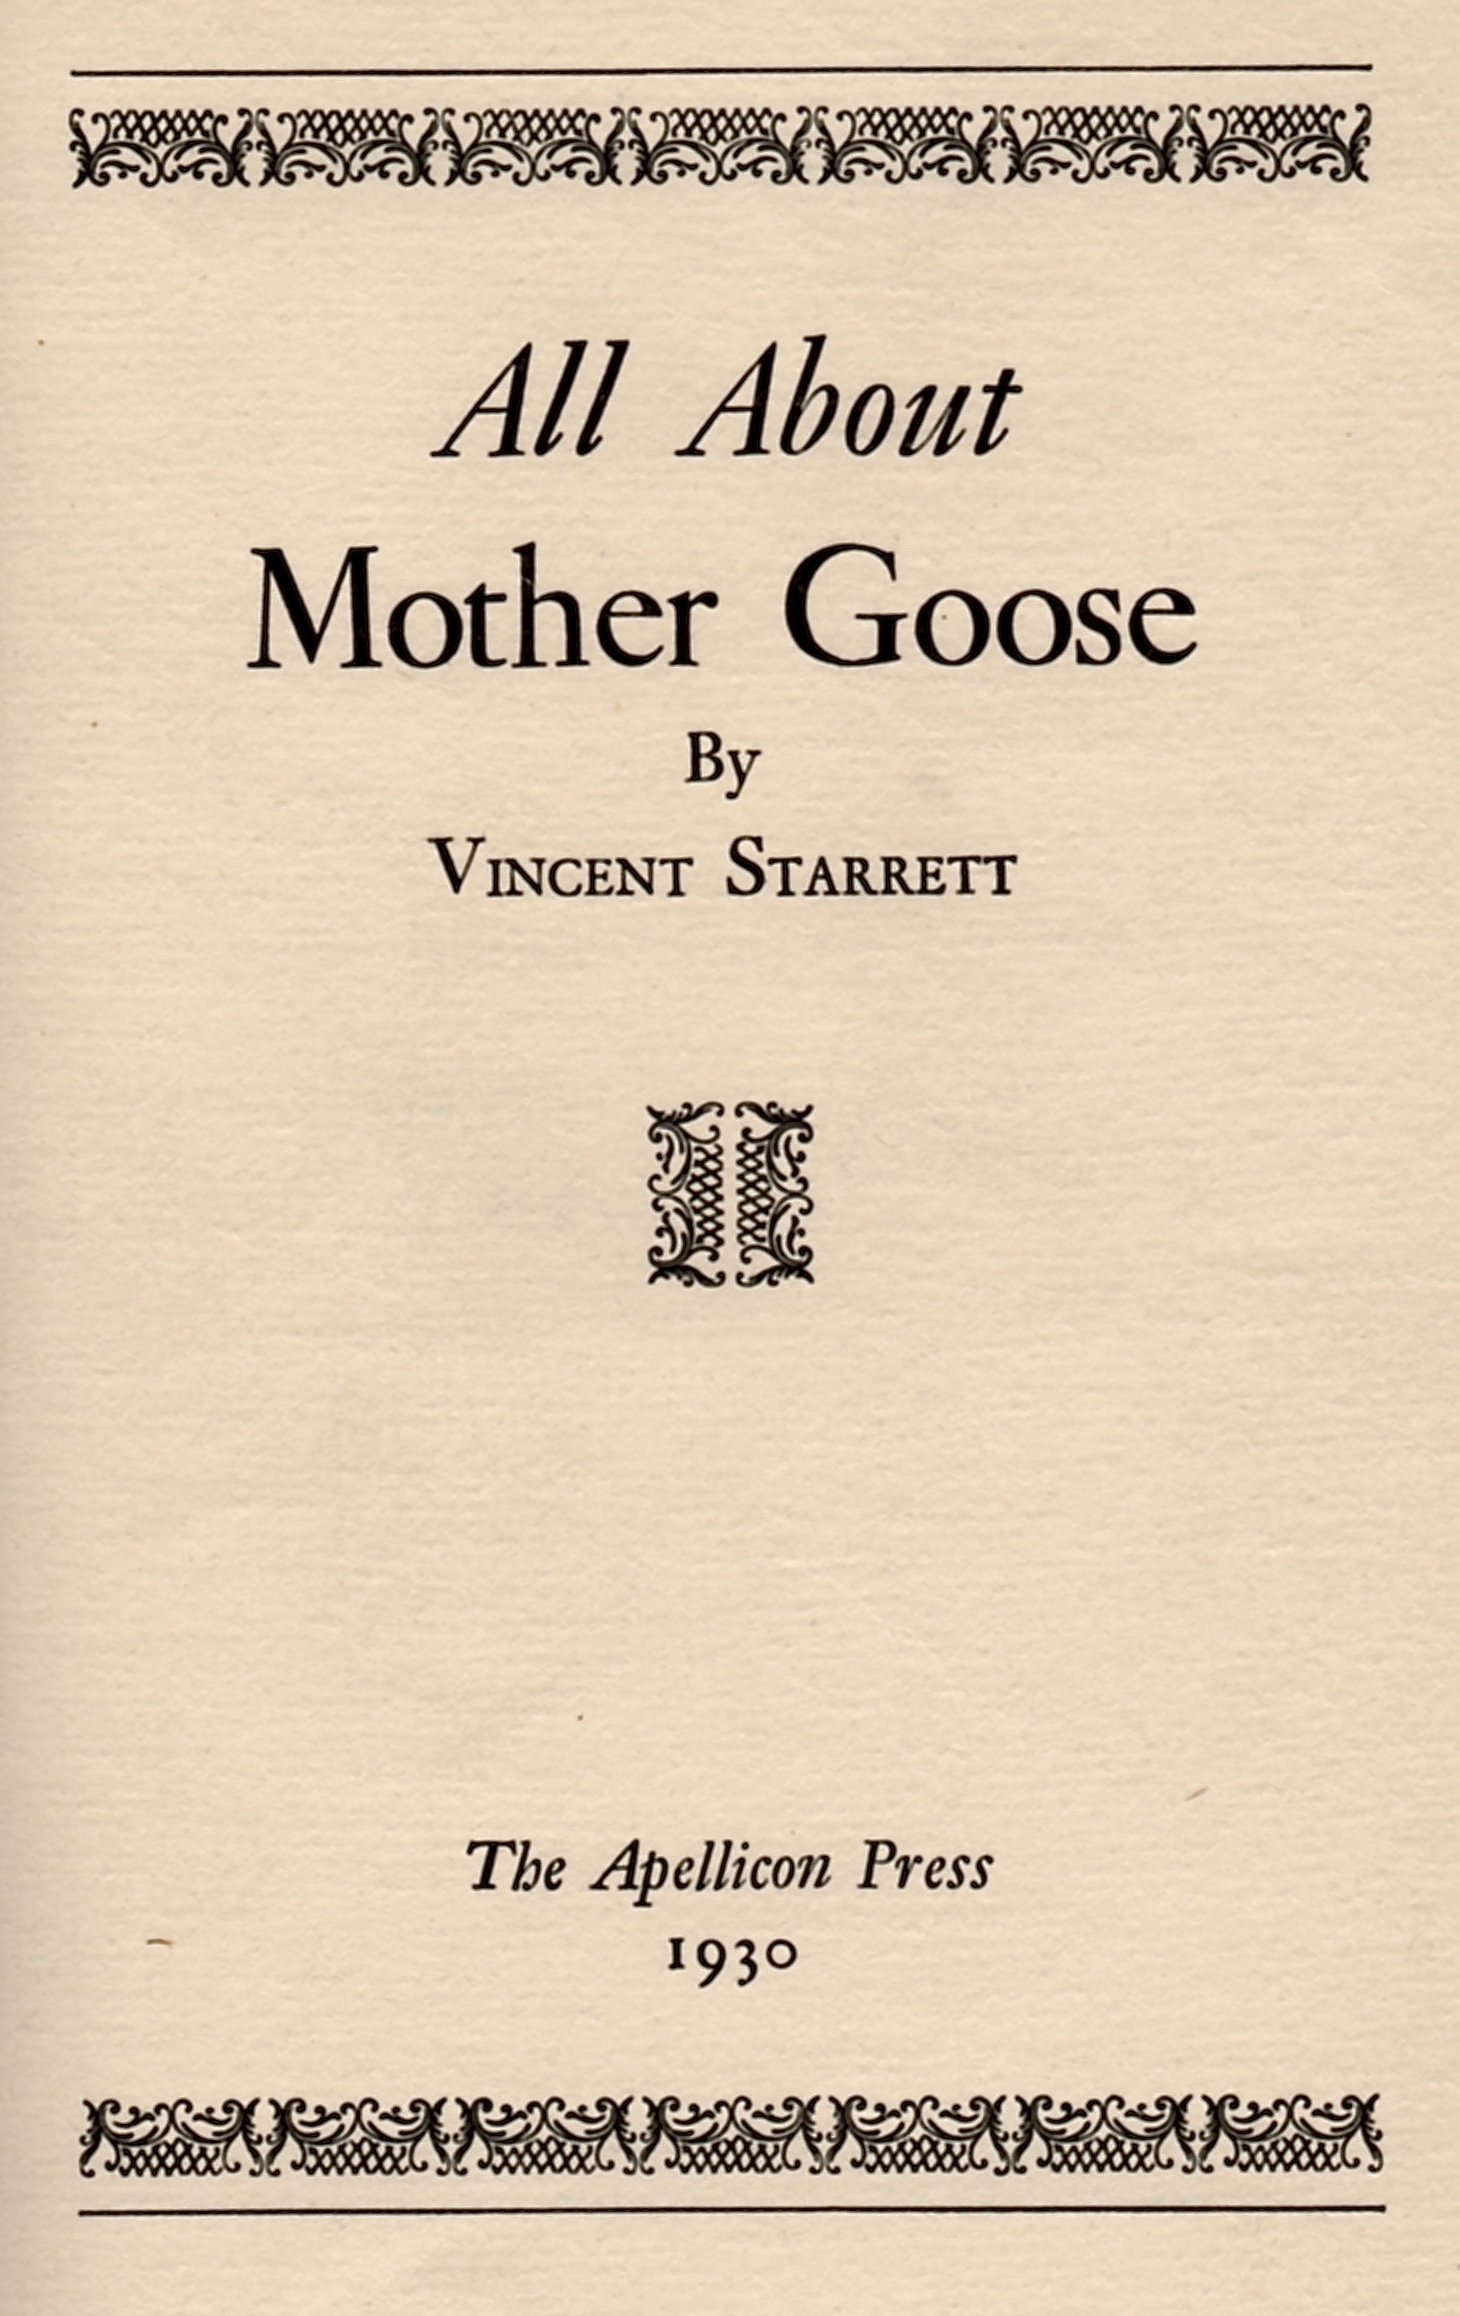 Mother Goose title page.jpeg